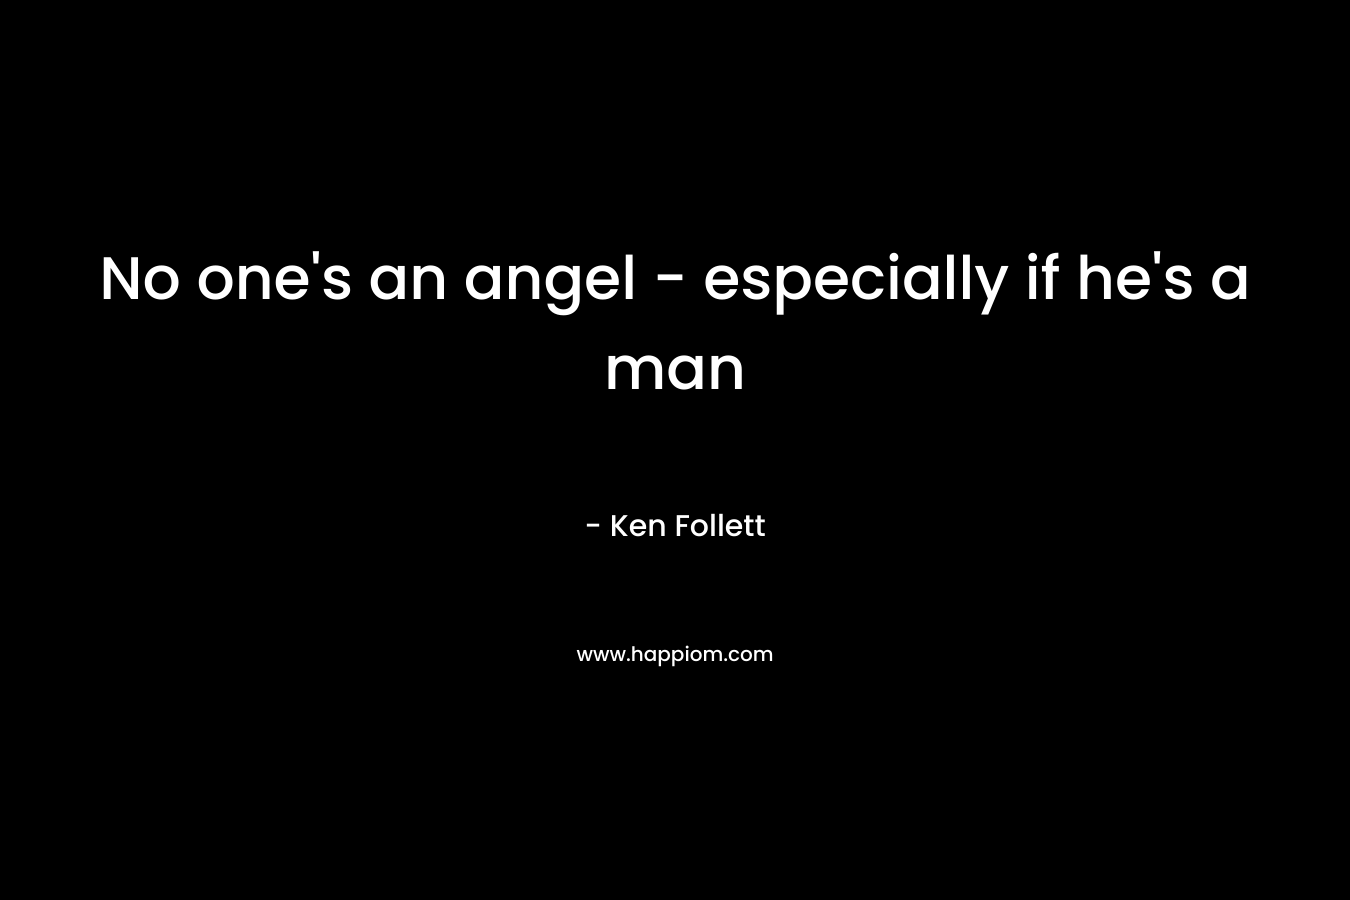 No one's an angel - especially if he's a man